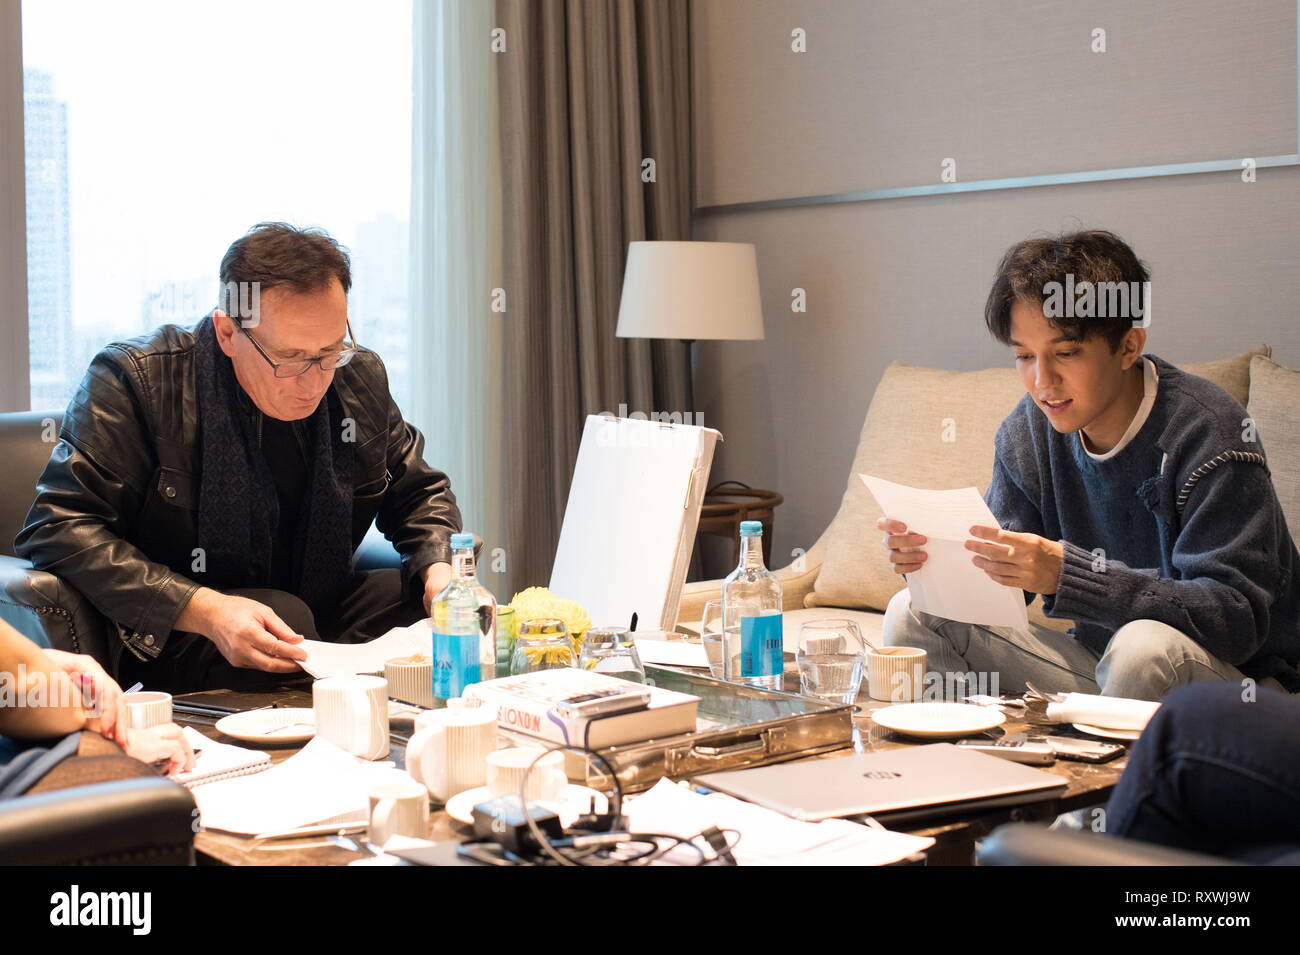 After his successful concert at Indigo O2, London November 19 2018. Kazakh singer Dimash Kudaibergen, is interviewed by Alexander Goldberg, Director of the World History Archive. Dimash is a classically trained, singer, songwriter and instrumentalist. He is renowned for his enormous and flawless vocal capacity, across 6 octaves and one note. He has performed in various European and Asian countries. In 2017 he was named "Best Asian Singer" at China's 24th Top Music Awards (considered to be China's equivalent to the Grammy Awards). Stock Photo